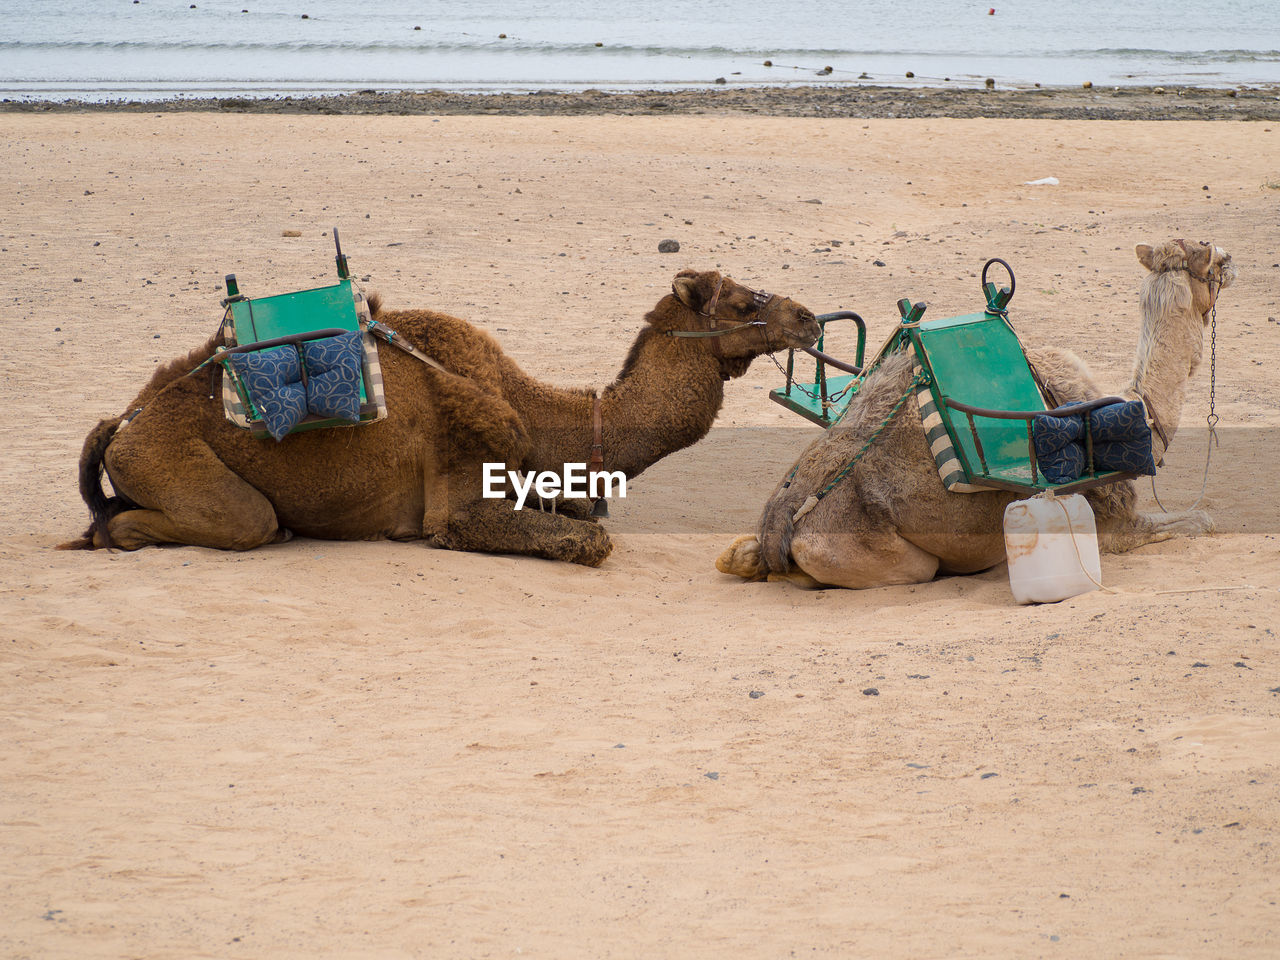 Camels relaxing at beach